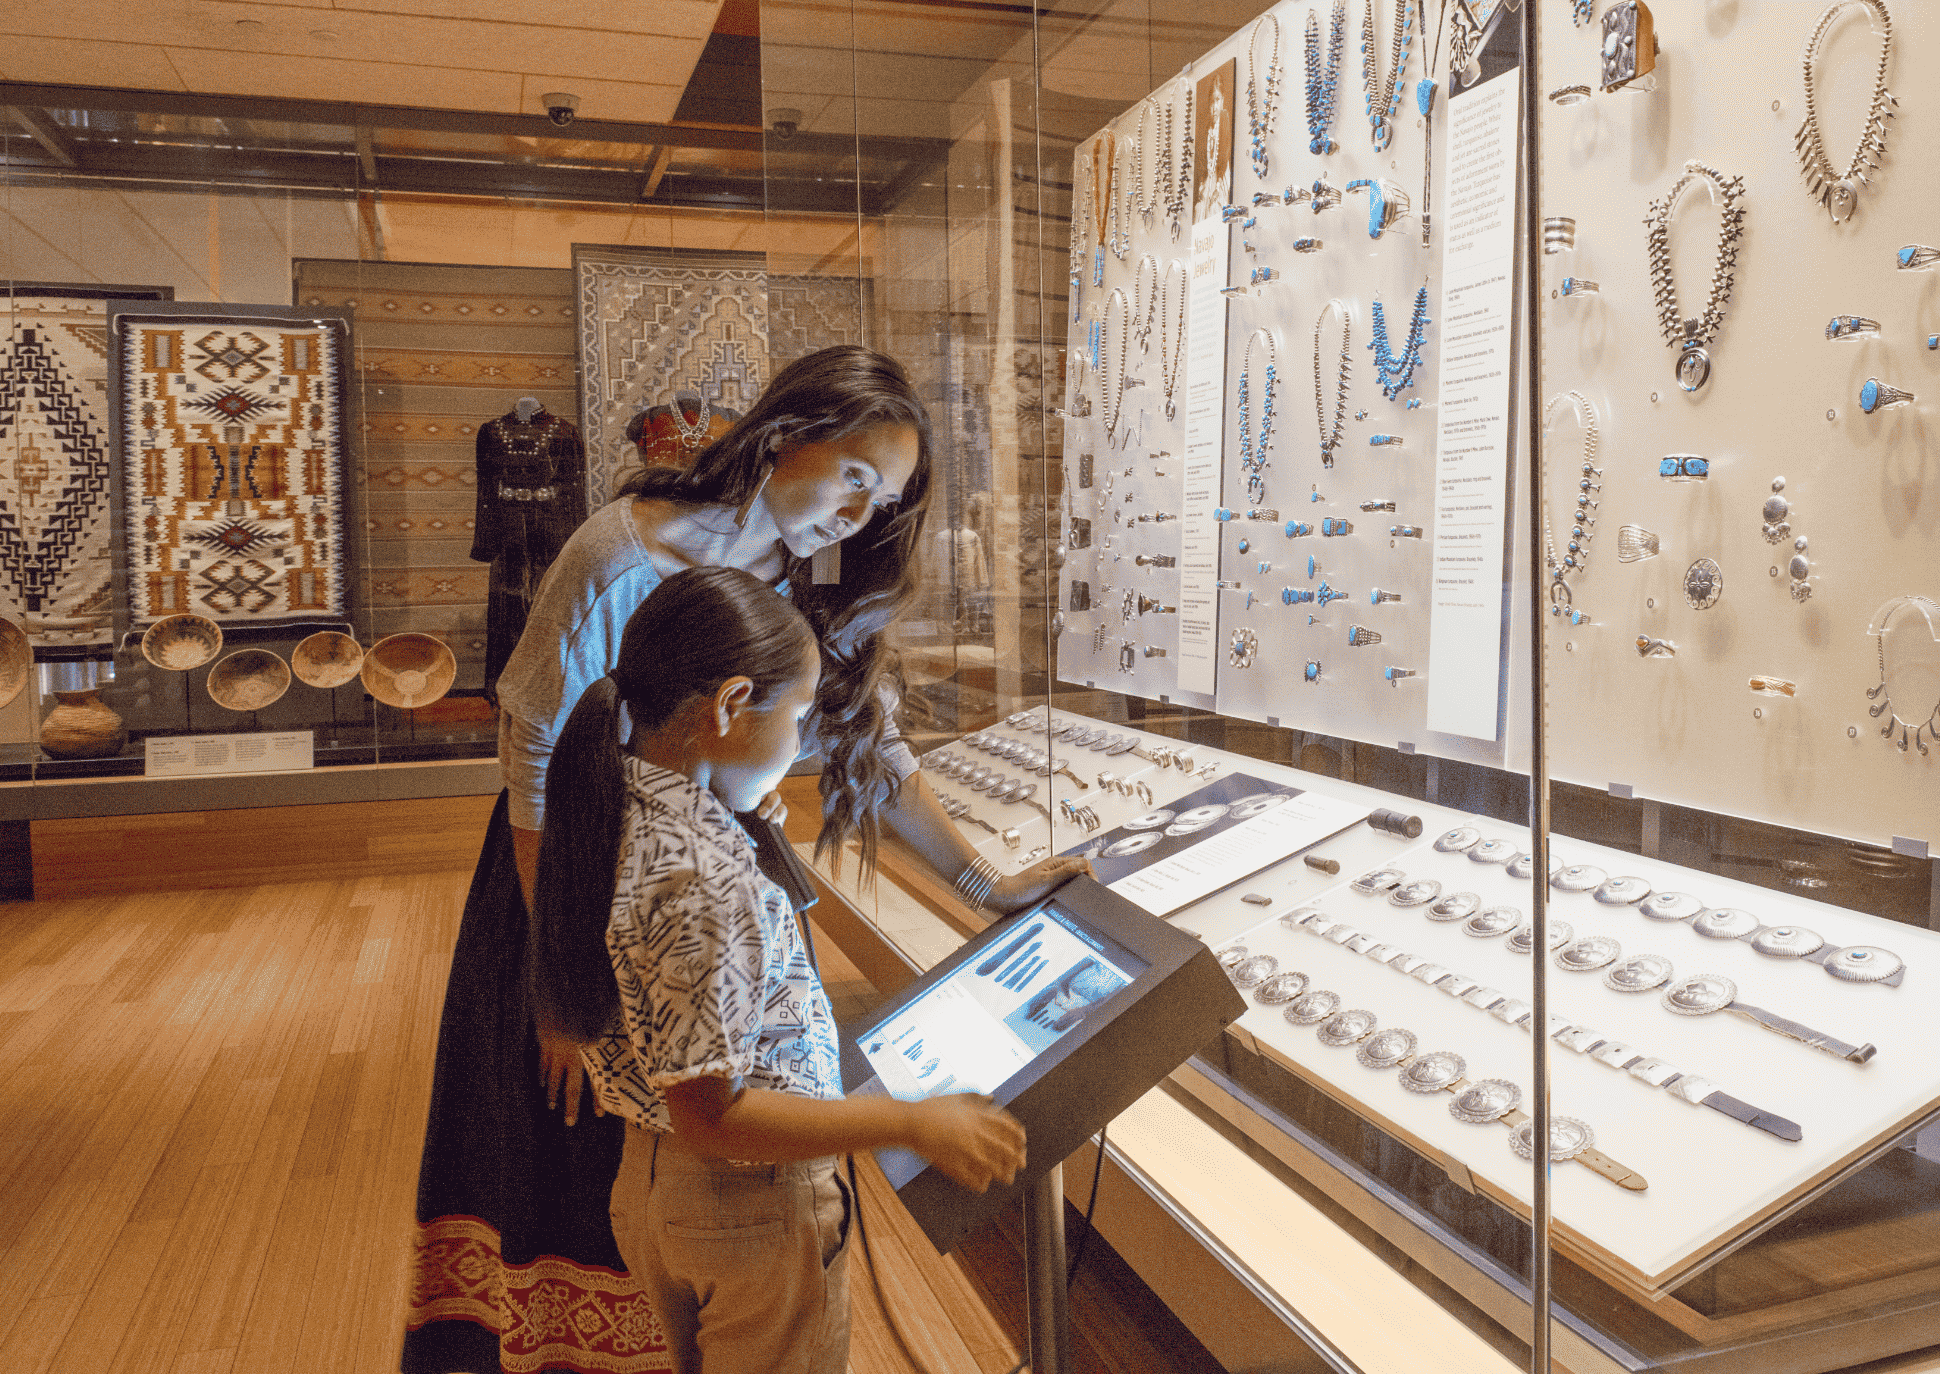 A woman and a child looking at a display of jewelry.